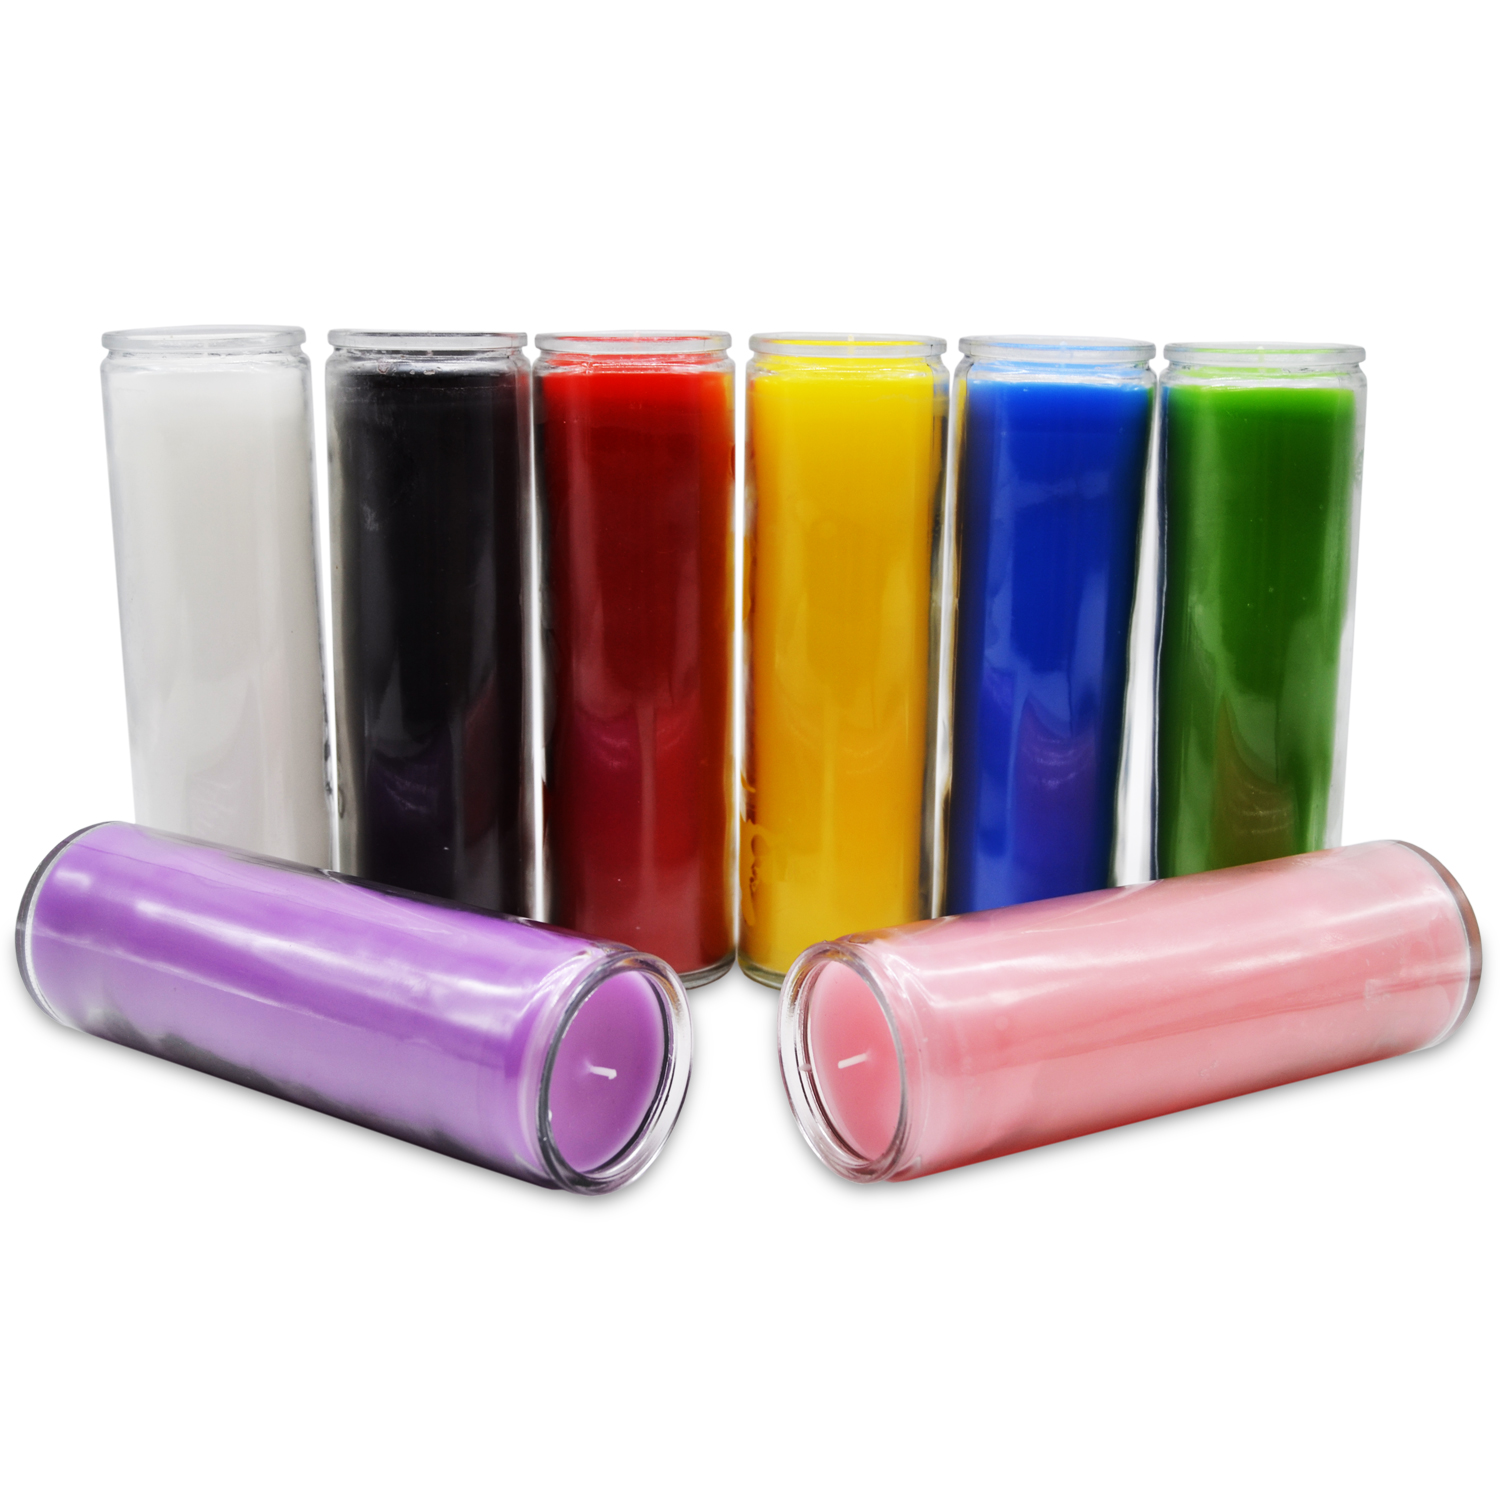 7 Day Glass Church Candles